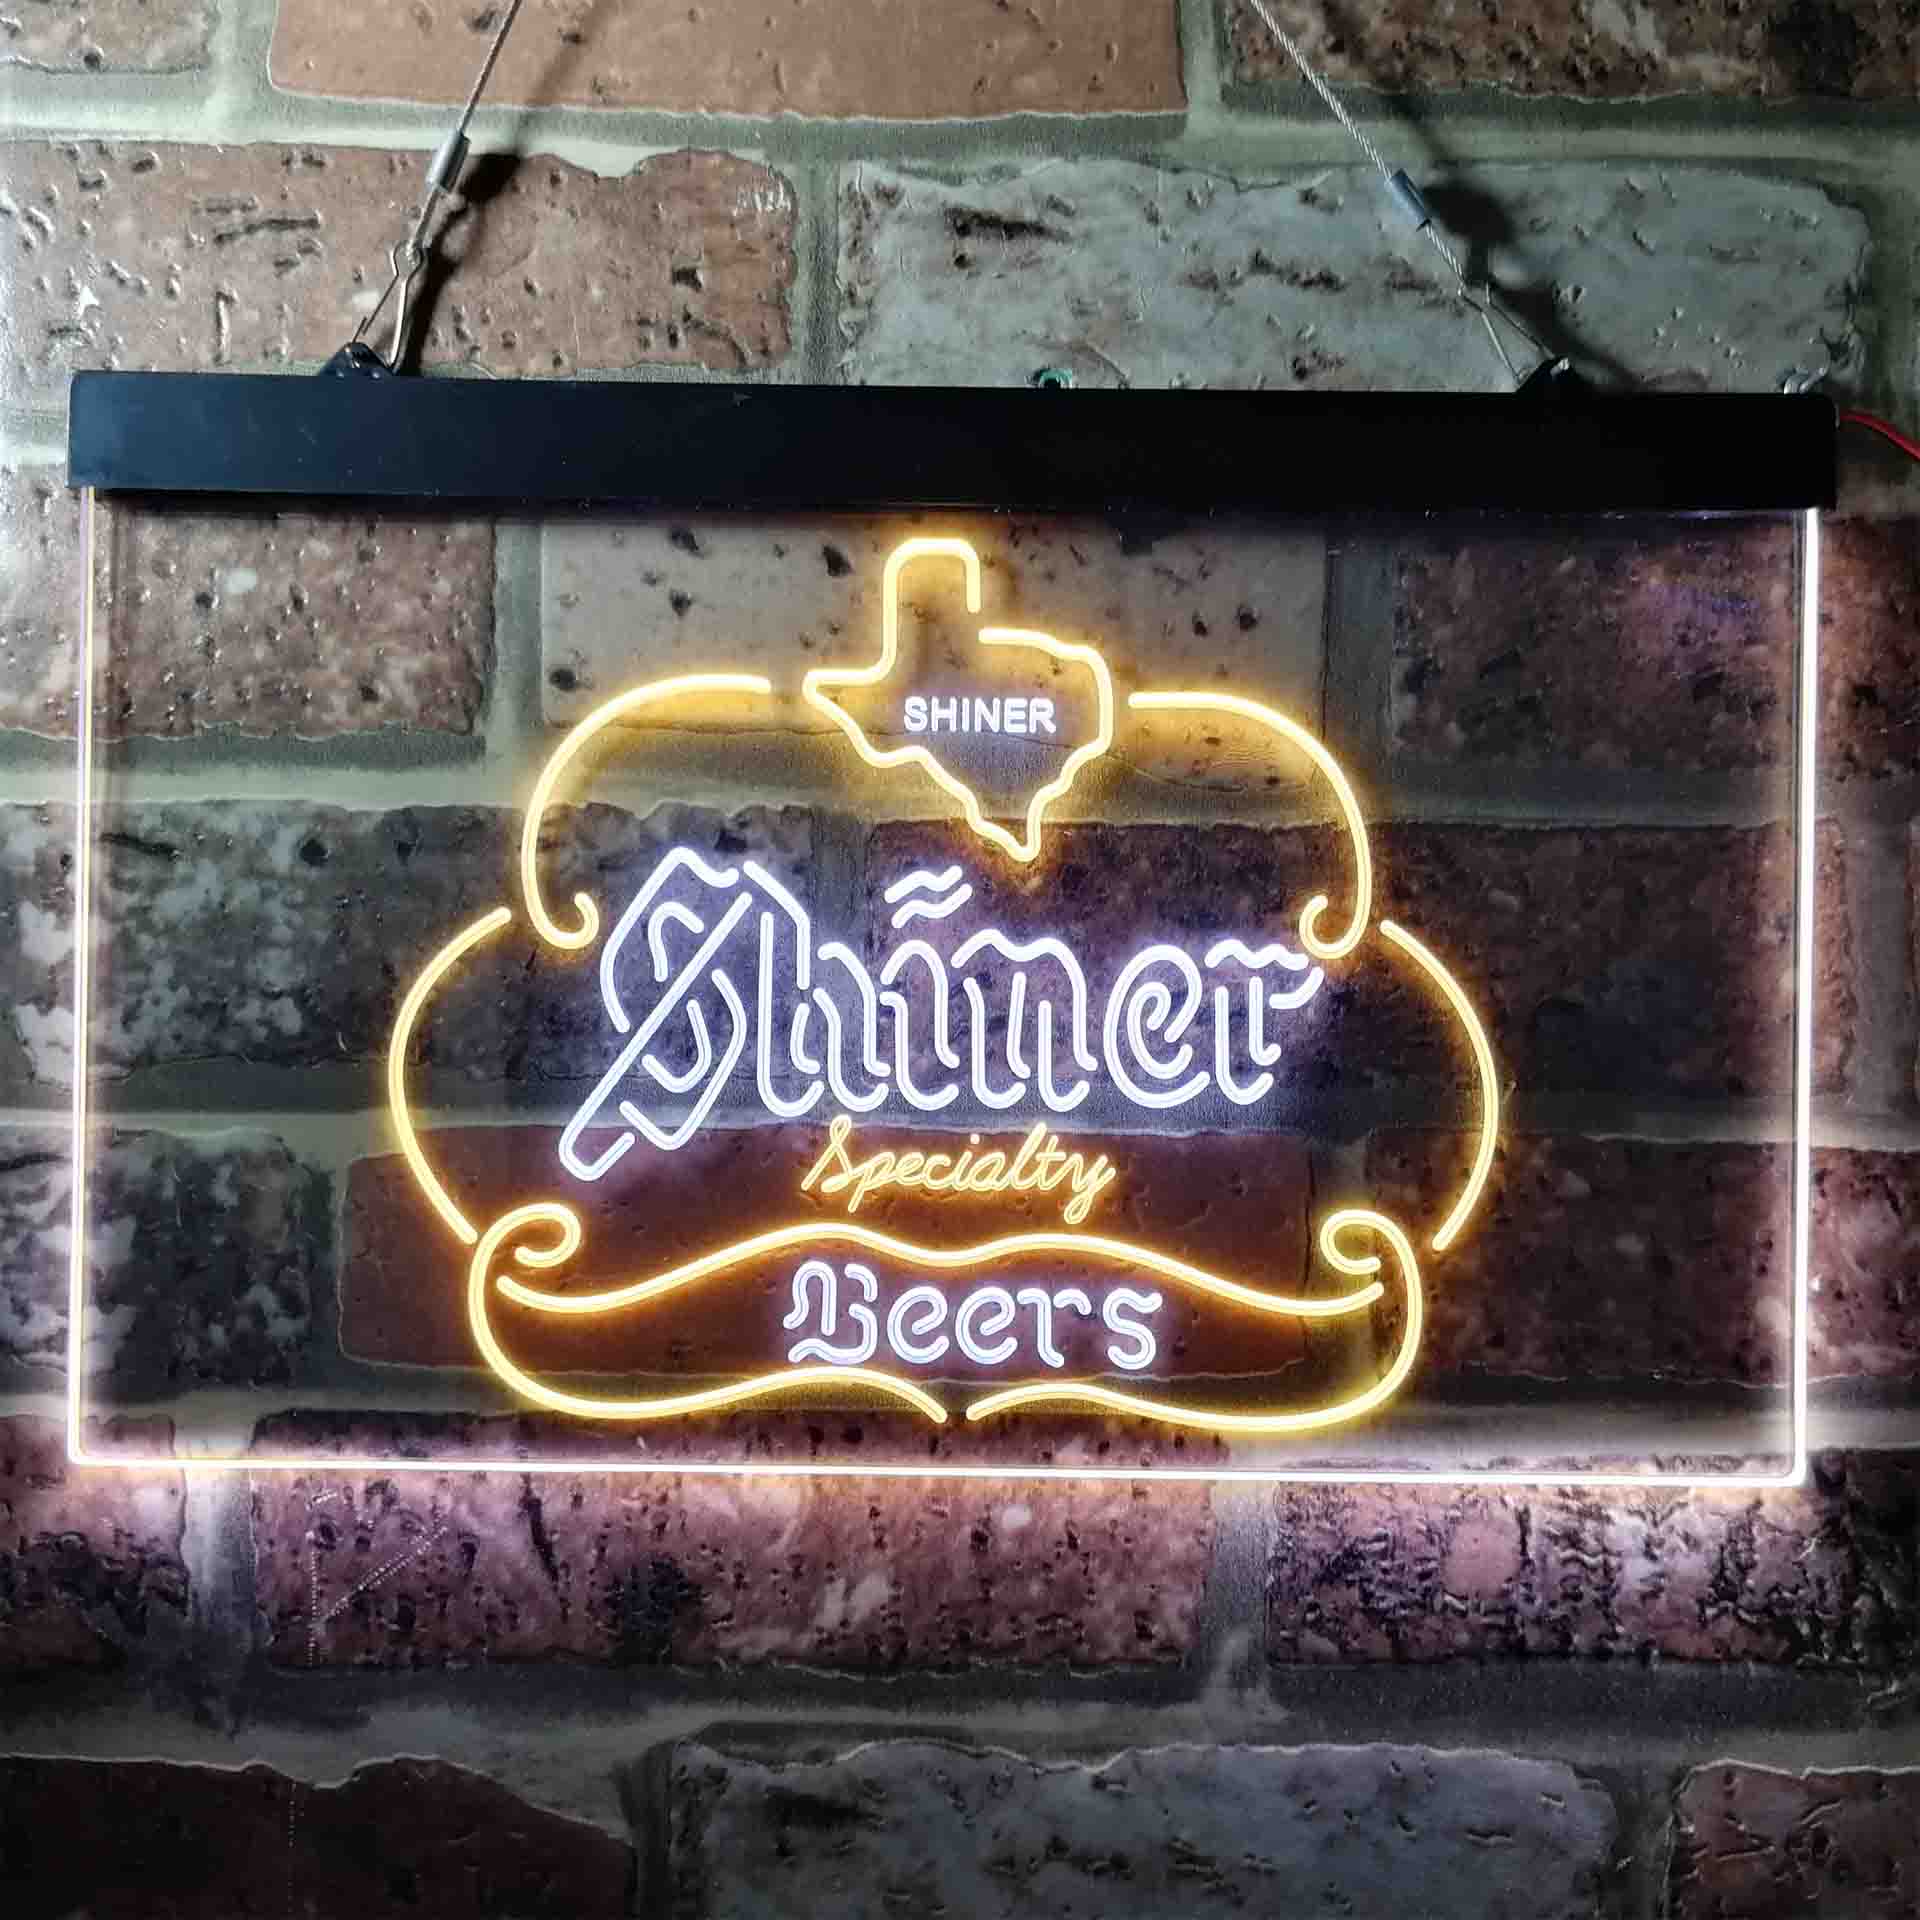 Shiner Beer Specialty Bar Neon-Like LED Sign